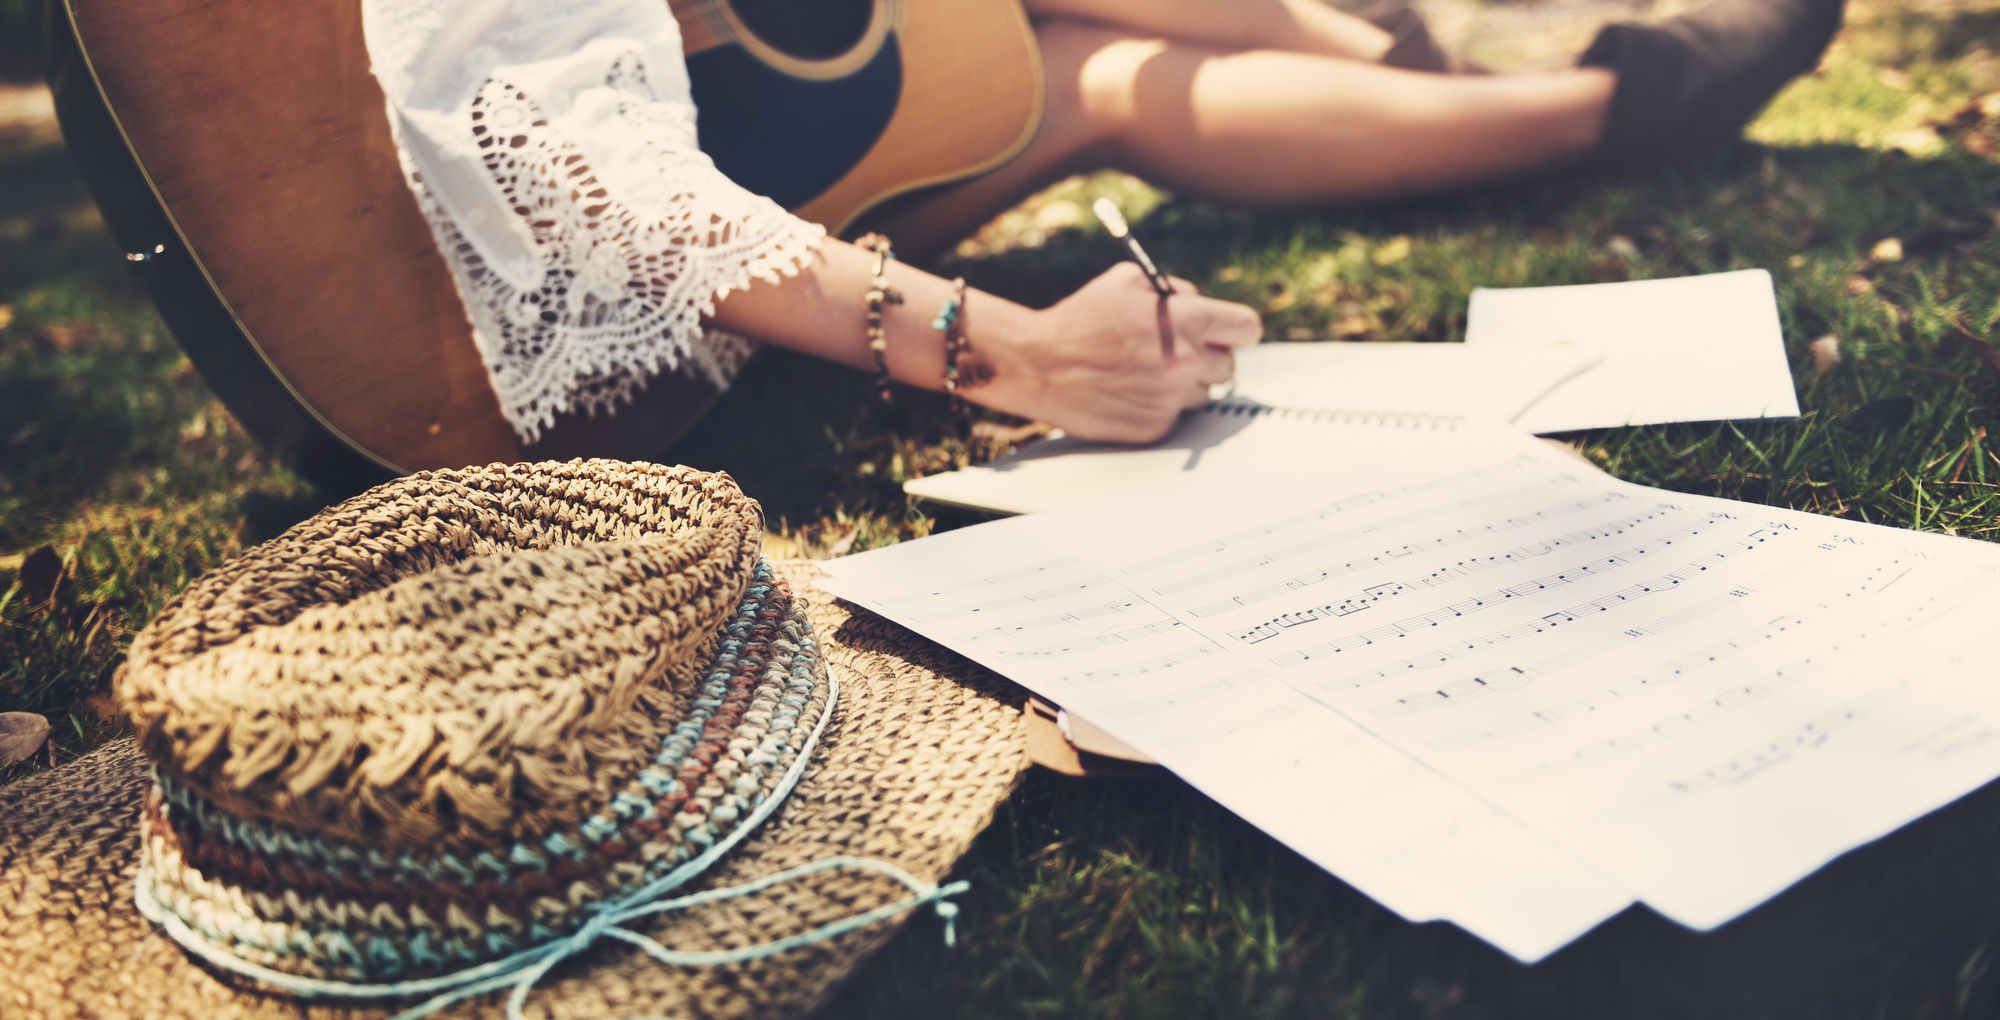 A young female songwriter lying on the grass holding a guitar and writing sheet music